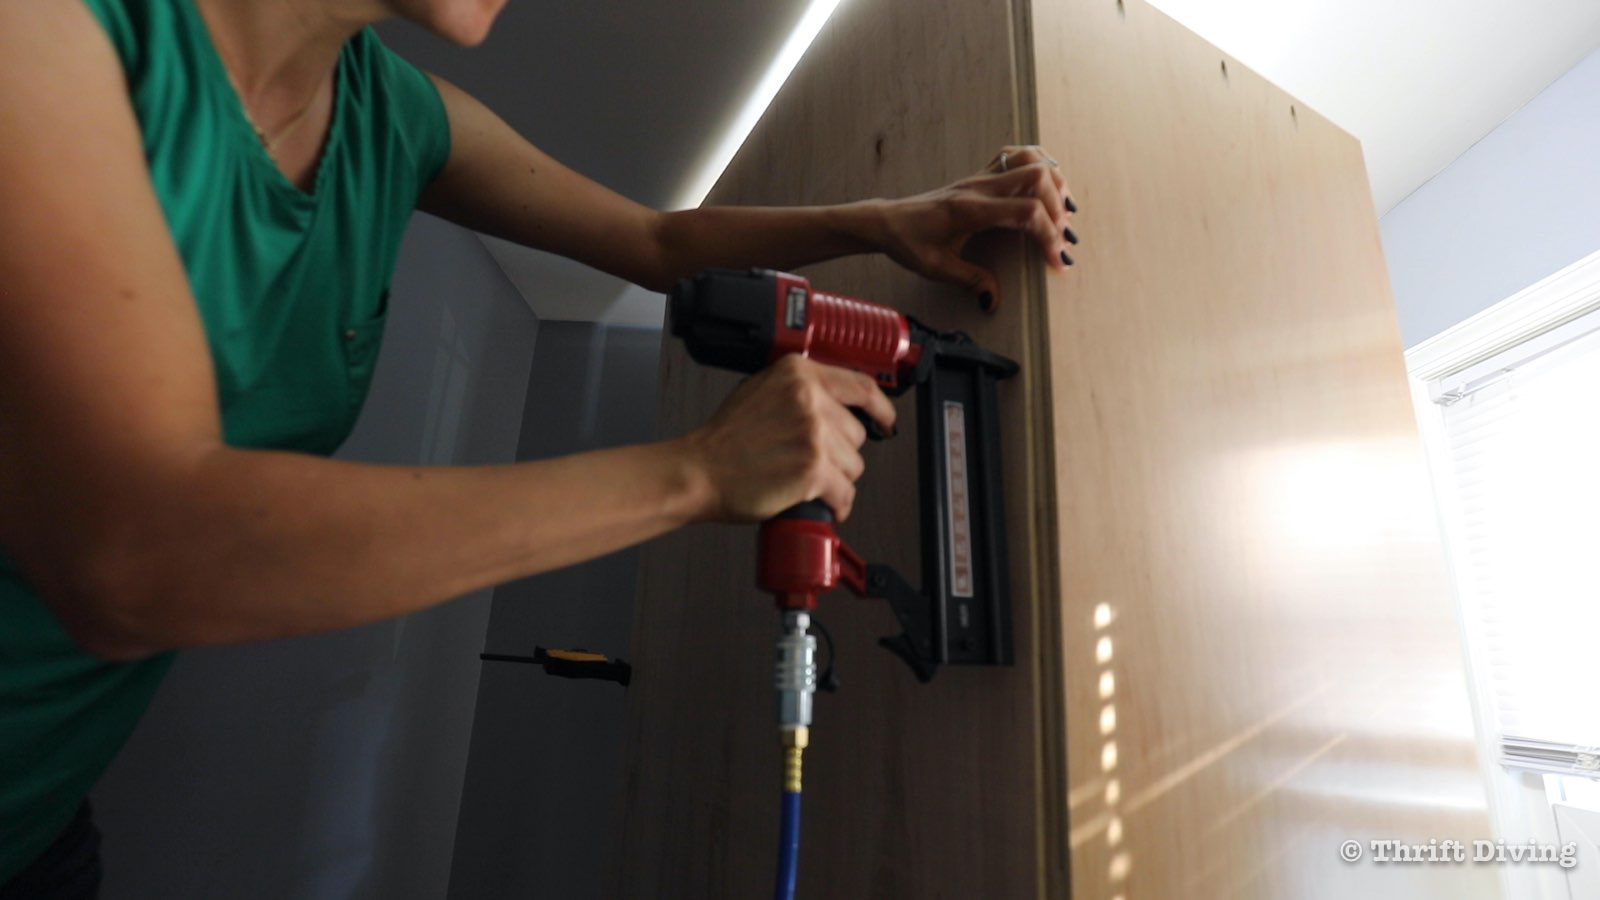 How to Build a Walk-in Closet Organizer From Scratch - Use the Arrow Fastener PT18G brad nailer to attach the back. - Thrift Diving